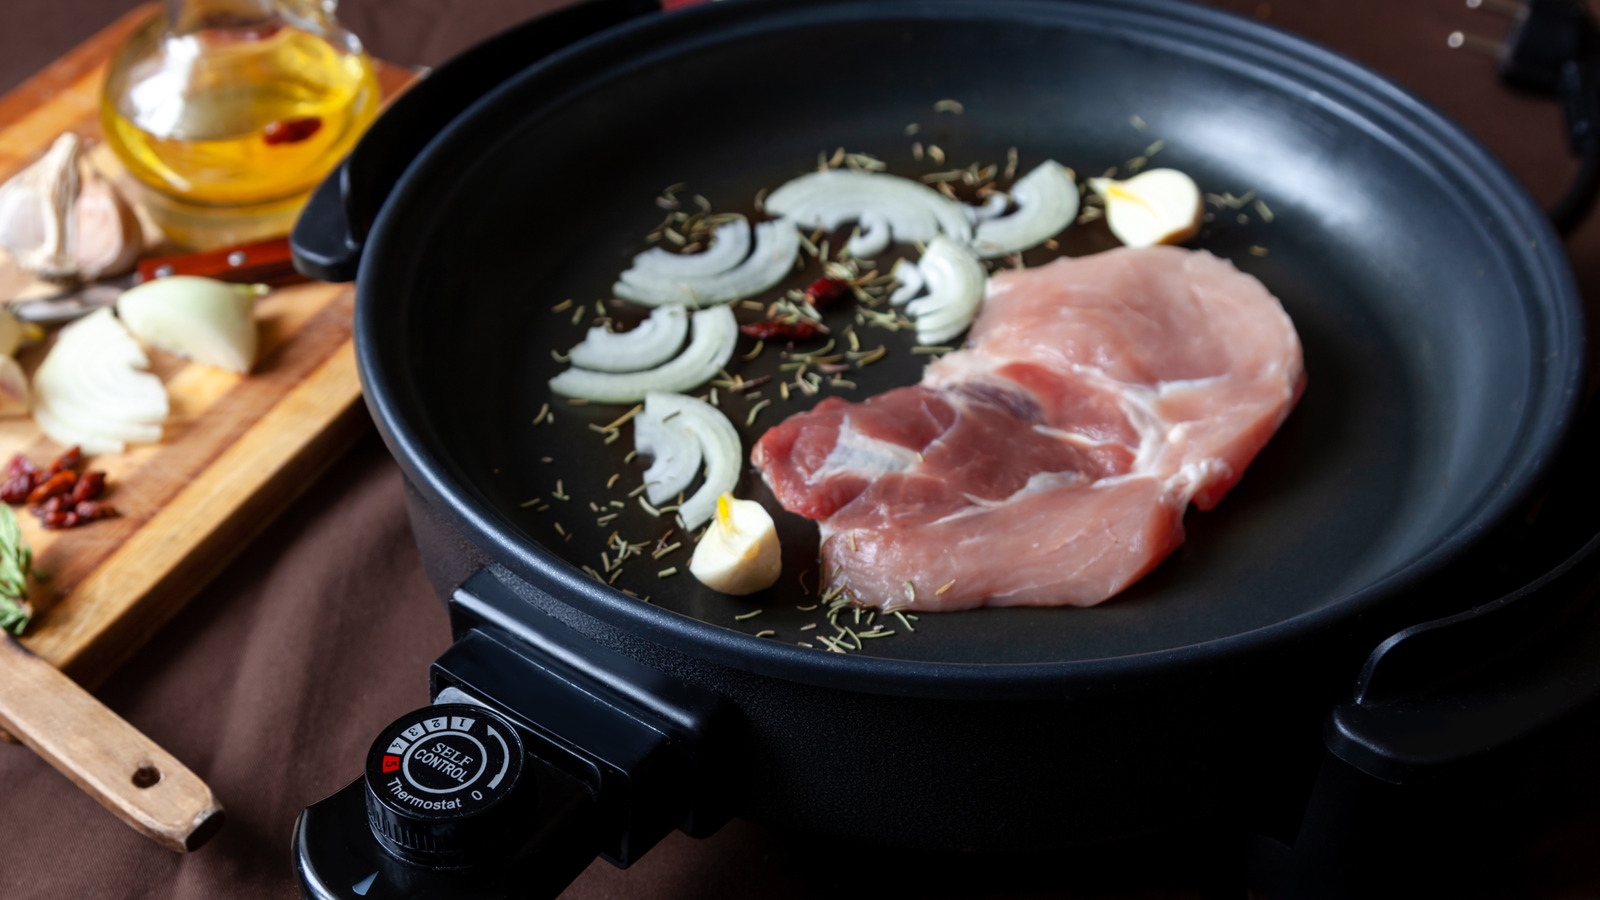 https://www.tastingtable.com/img/gallery/the-12-absolute-best-uses-for-your-electric-frying-pan/l-intro-1662763063.jpg